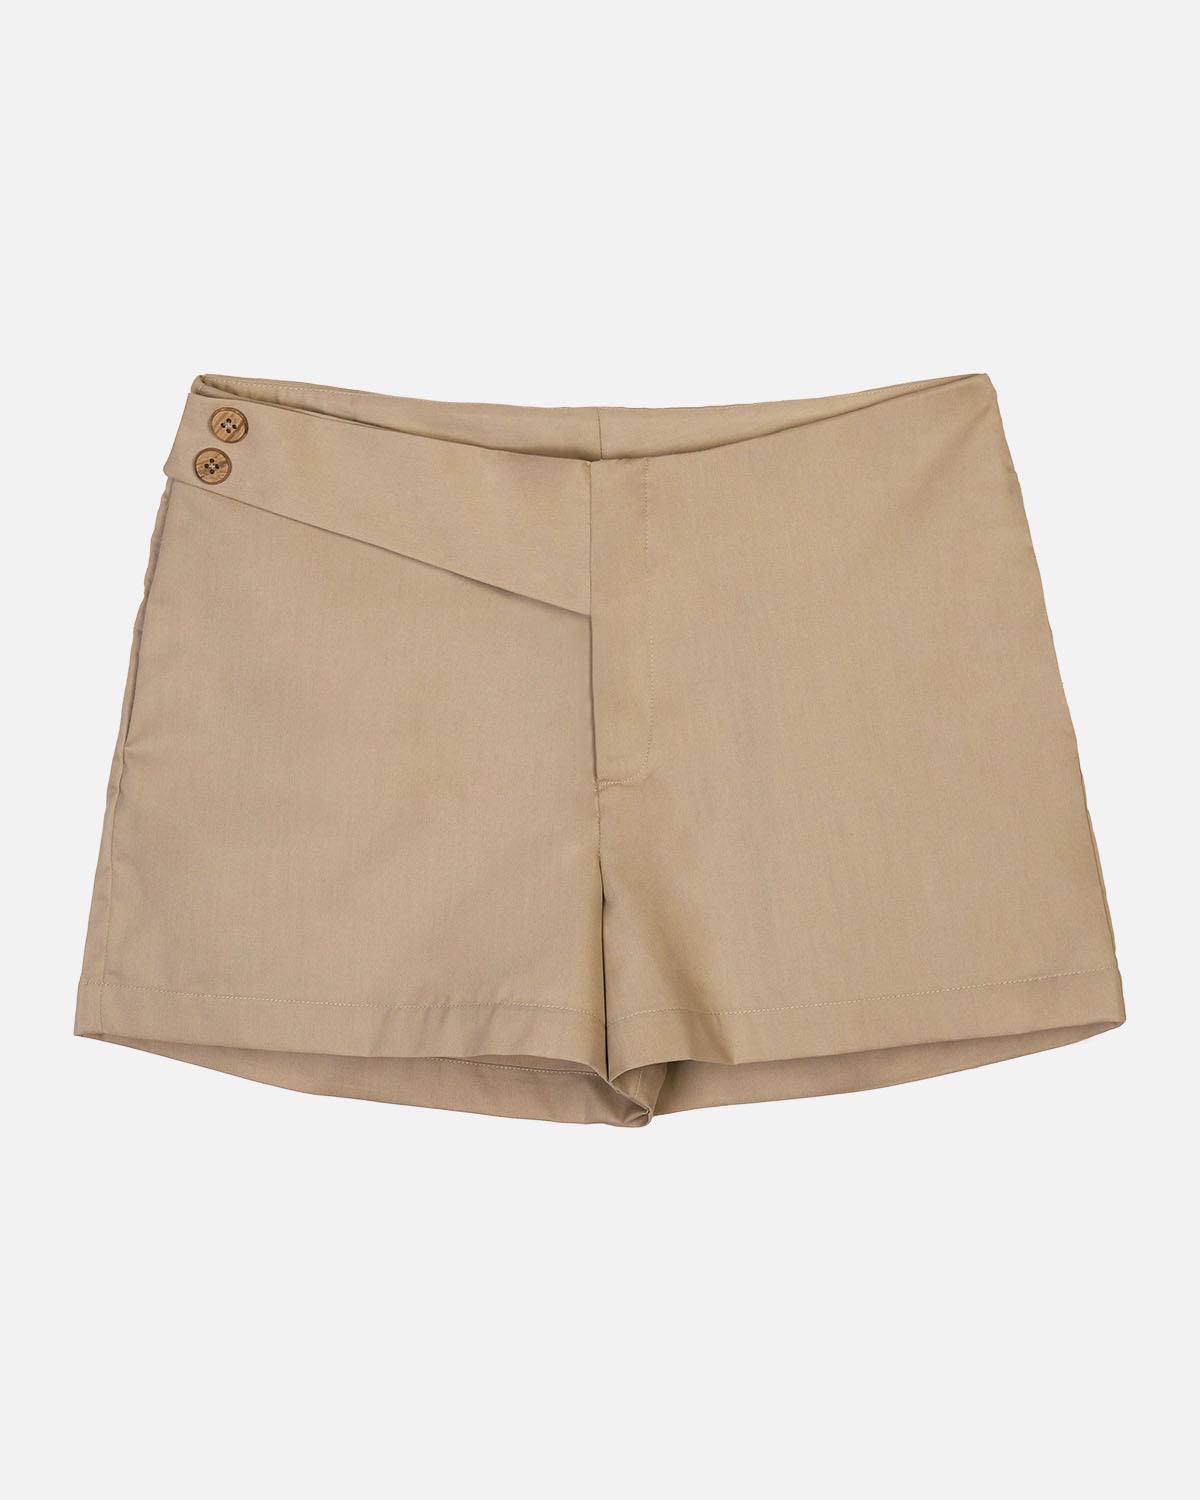 Unica Quest Shorts | Styleshops Philippines